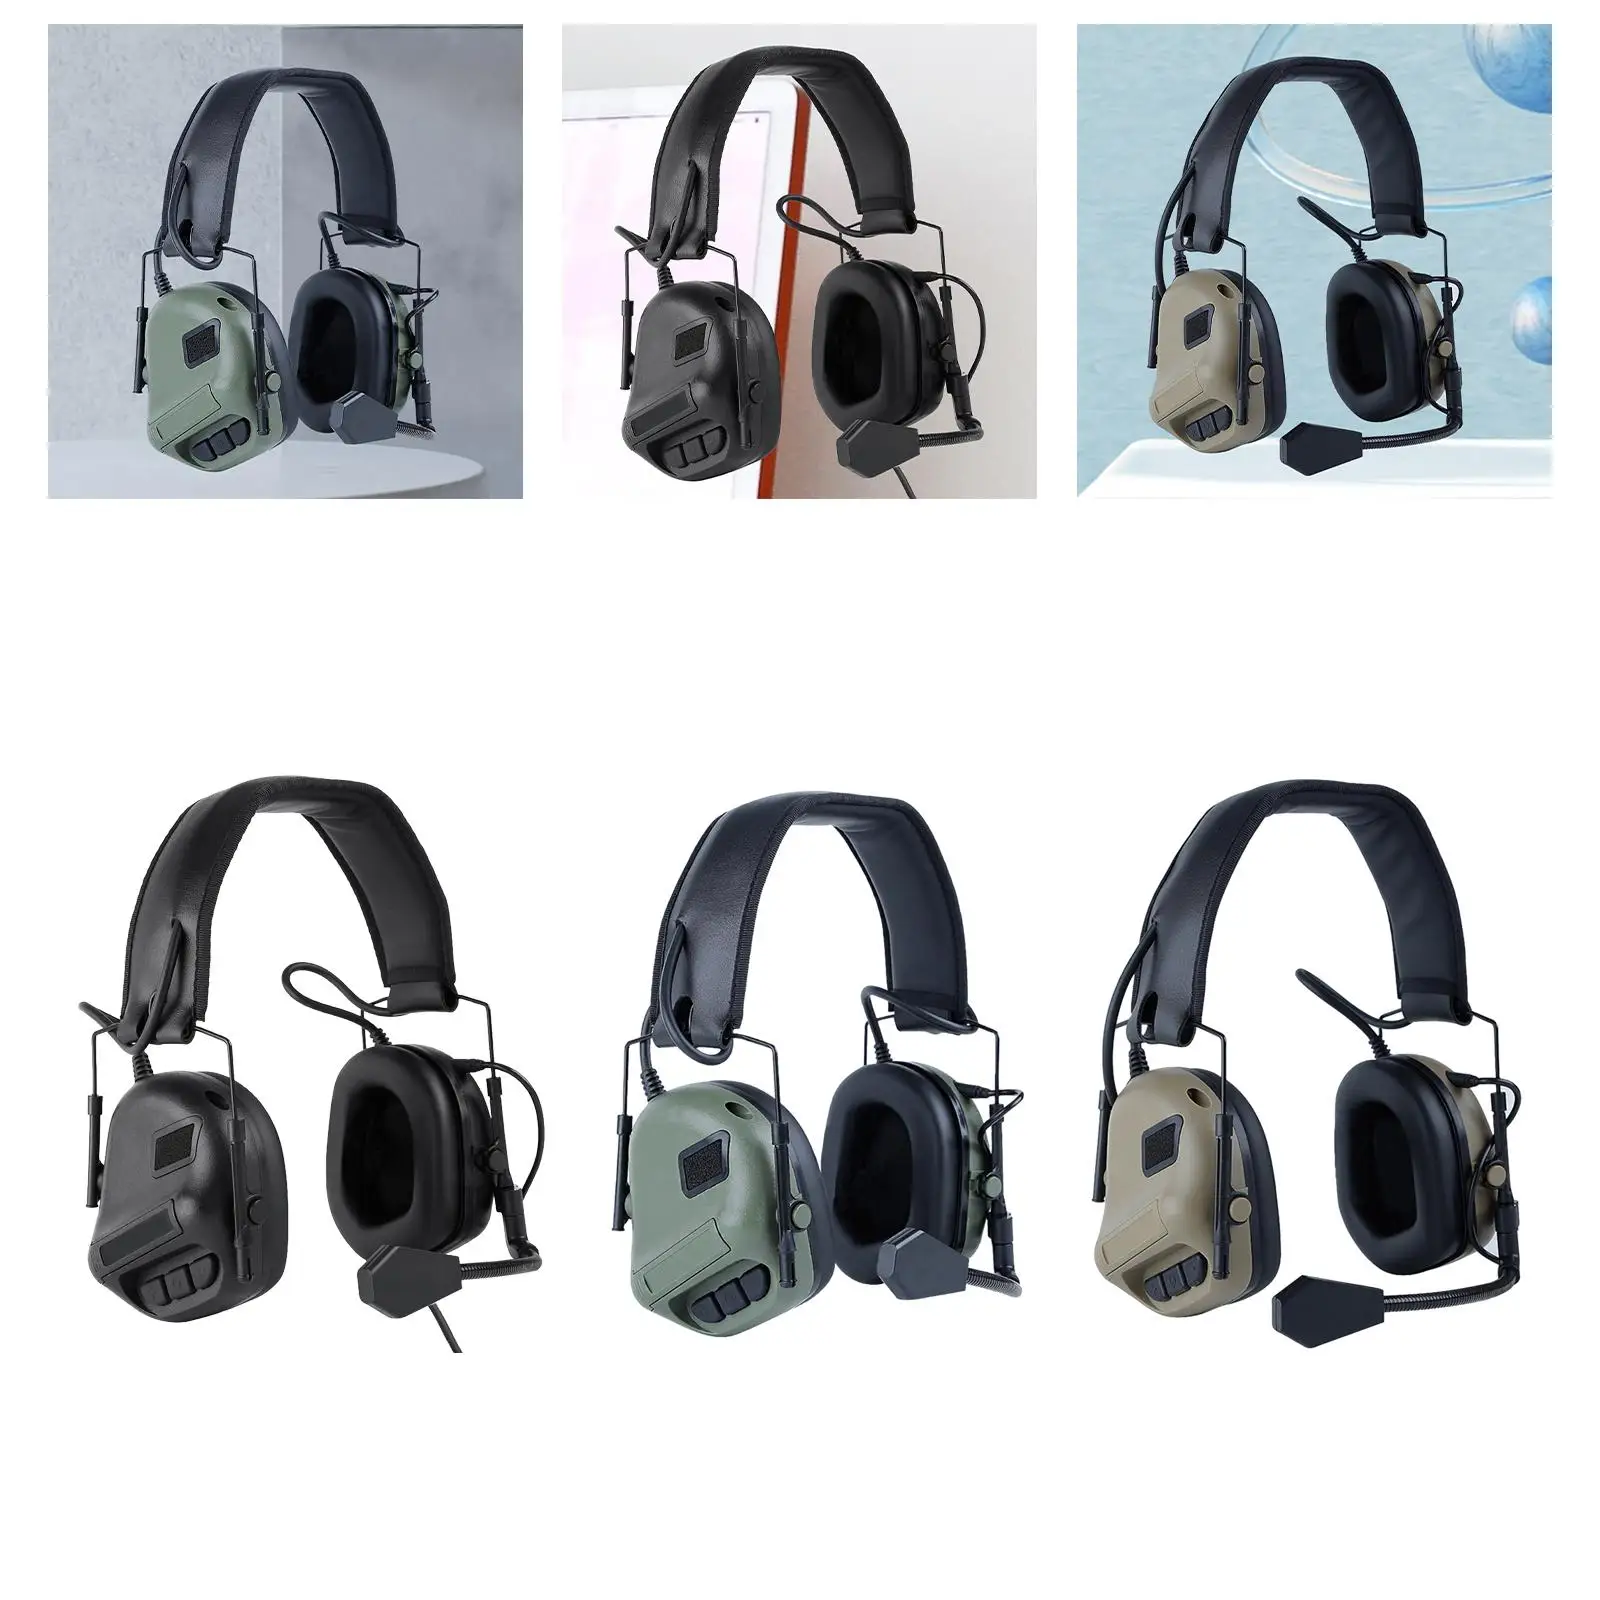 Hearing Protection Foldable Lightweight Ear Cups Ear Defenders Ear Muff for Lawn Mowing Manufacturing Sleeping Concerts Studying